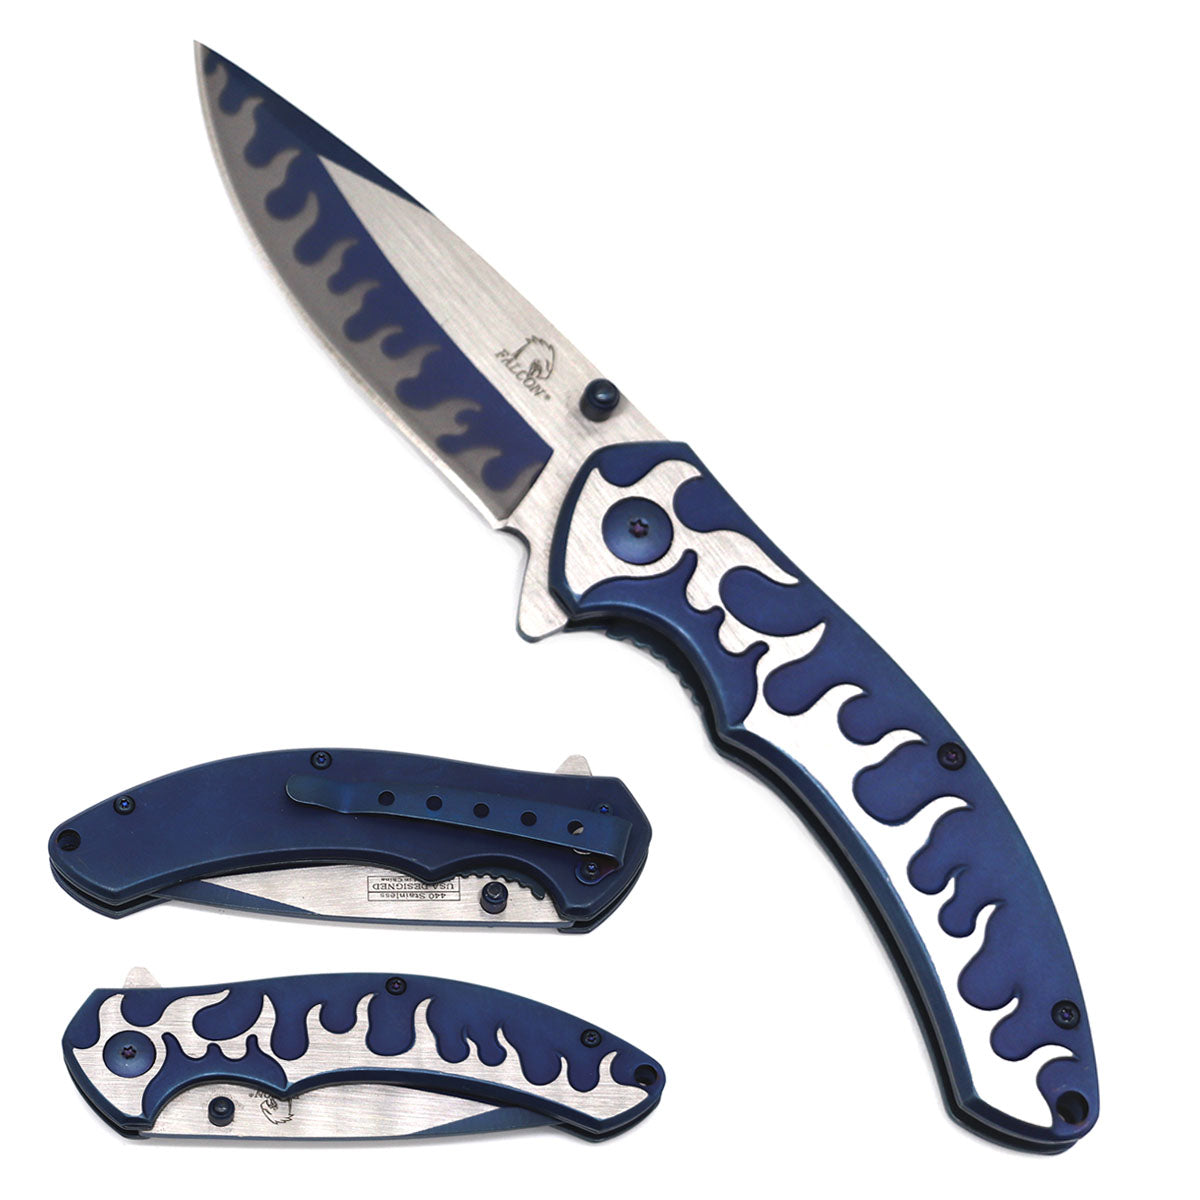 Falcon 8" Blue Stainless Blade Spring Assisted Knife